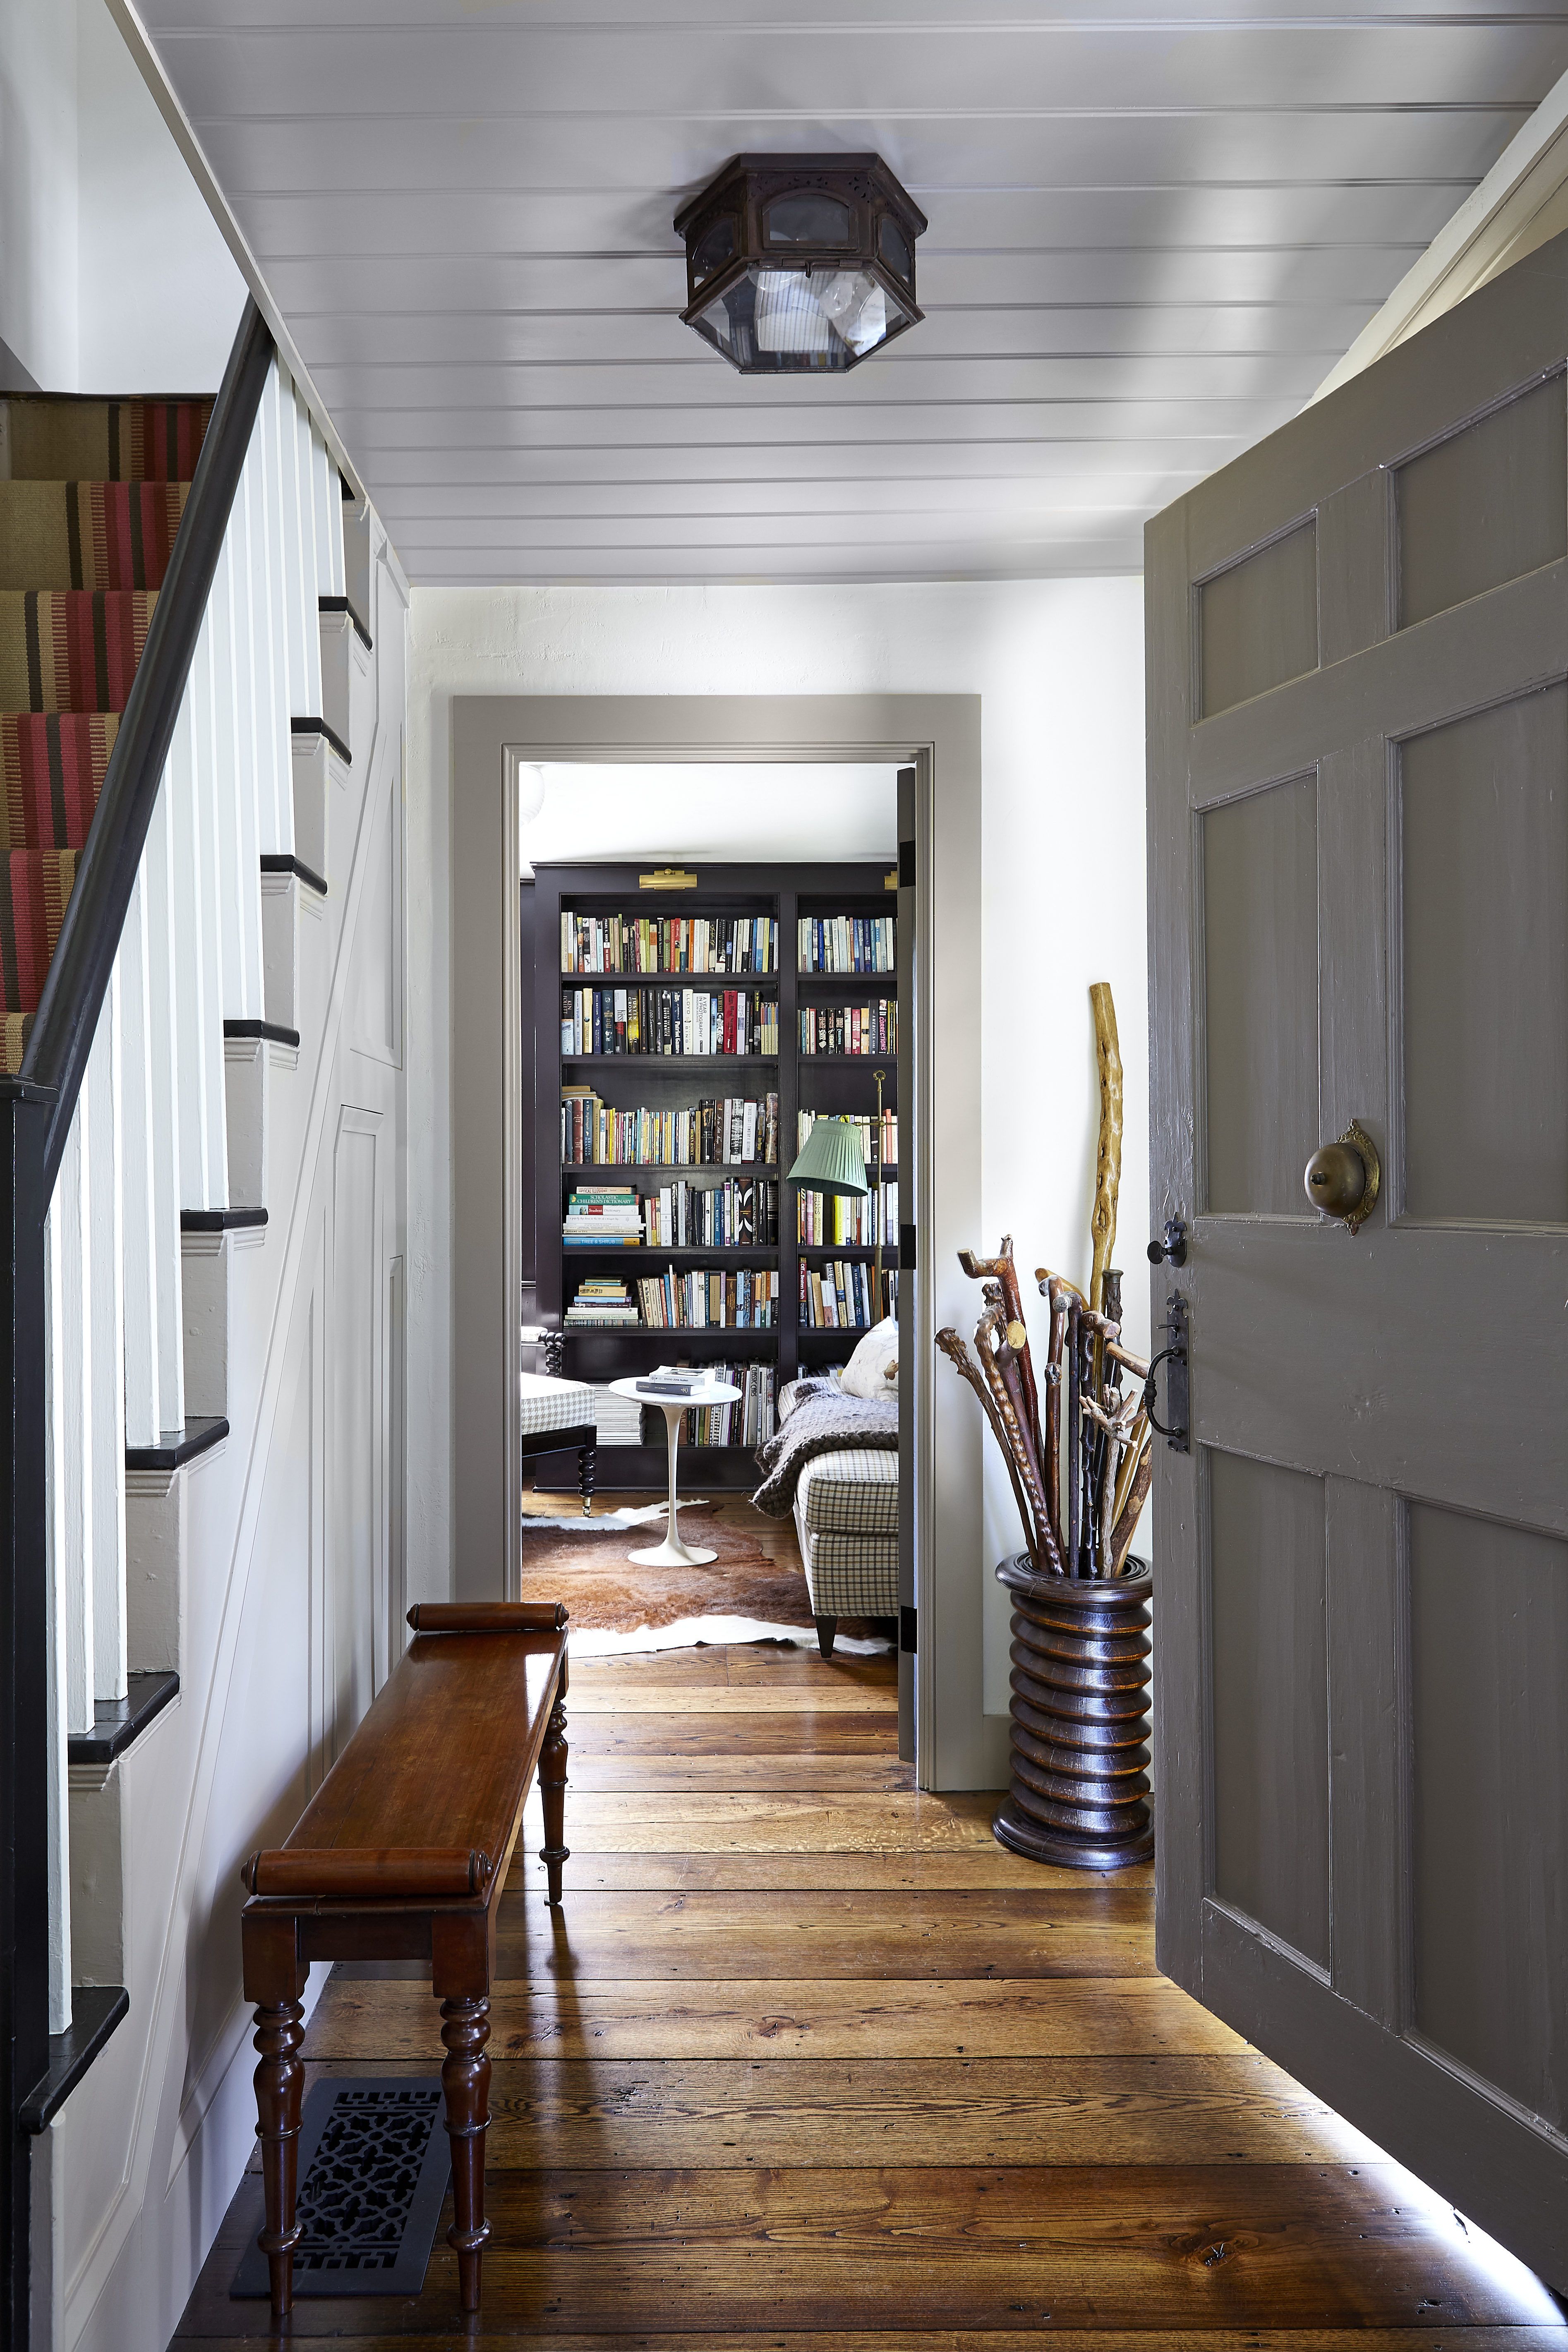 the entrance hall has wide oak flooring and a steep 18th century stairwell and cast iron bell on the door
a bookshelf is in the background